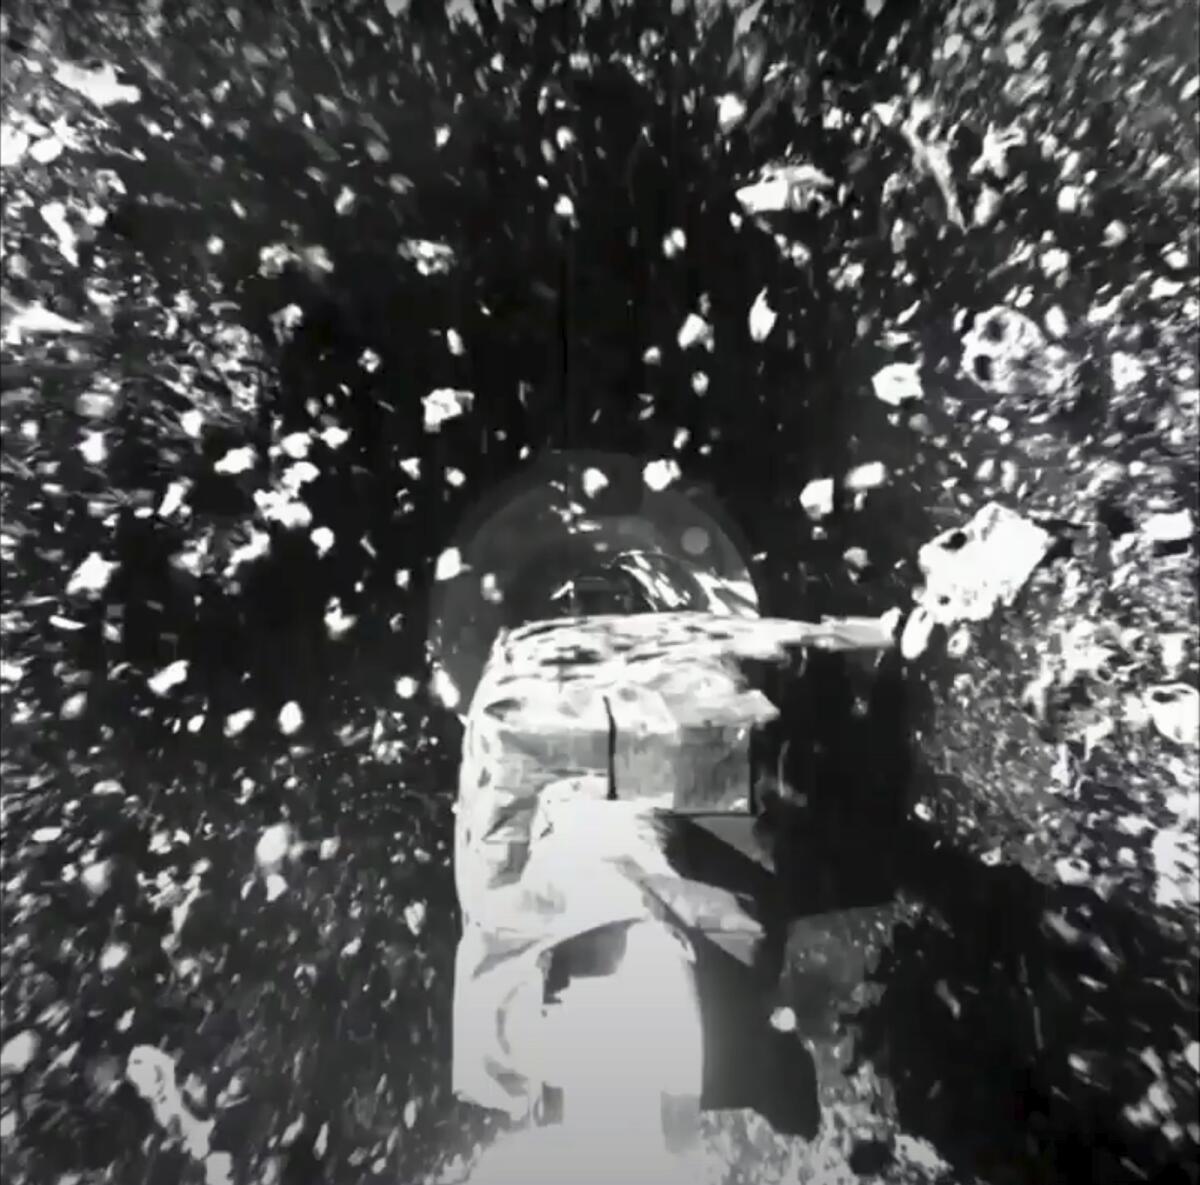 A view of a spacecraft amid floating debris 